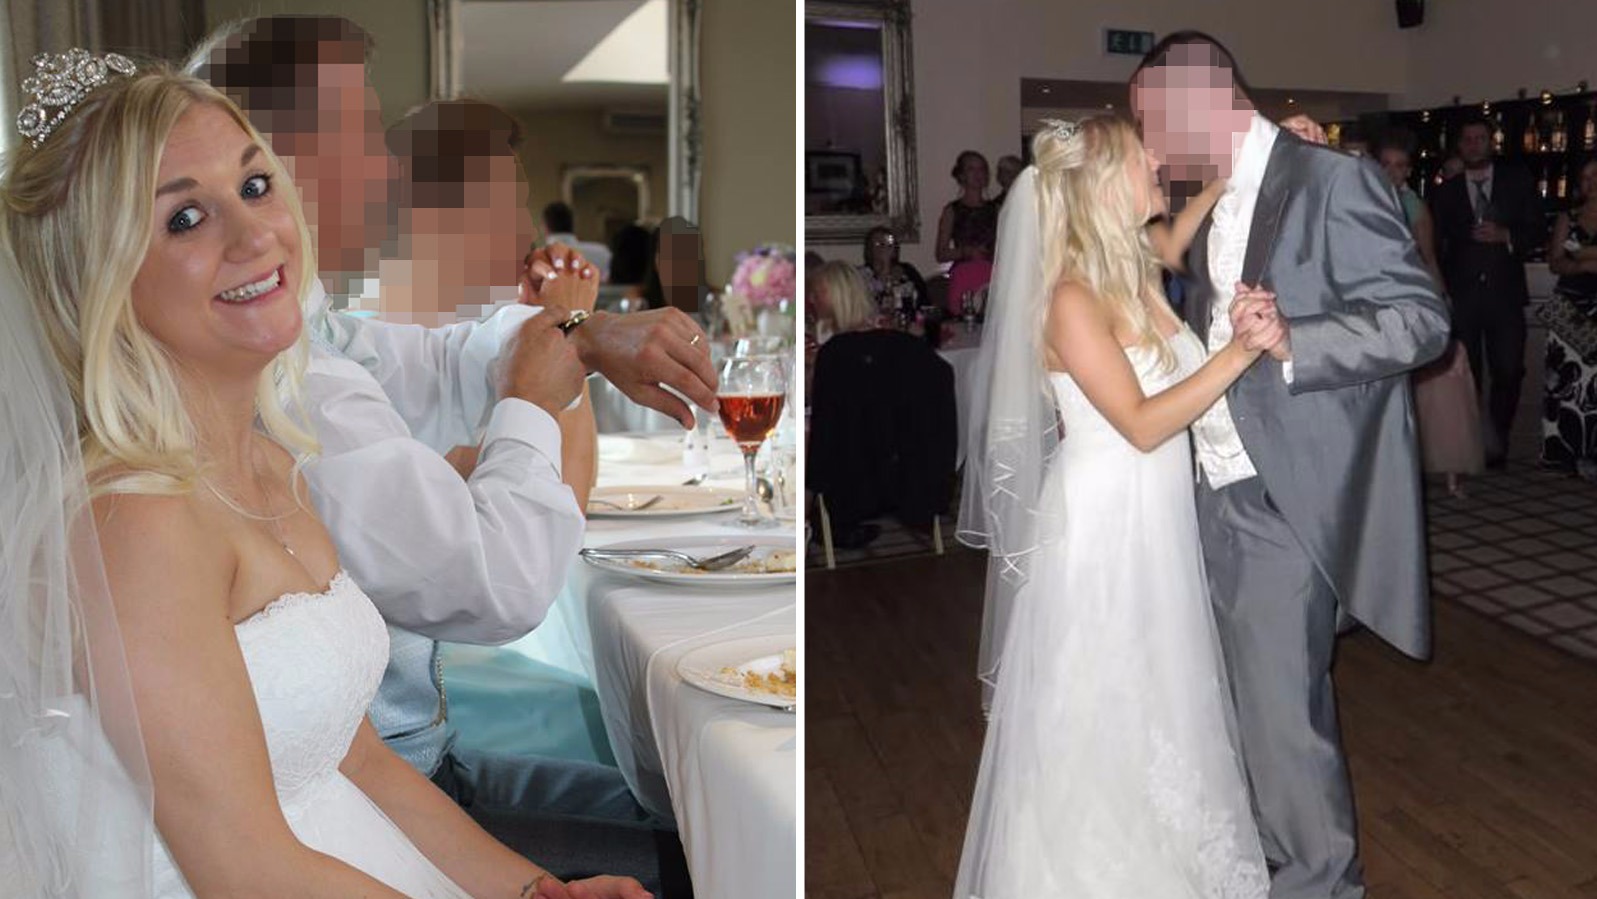 Woman Sells Her Wedding Dress On Ebay To Pay For Divorce From Cheating